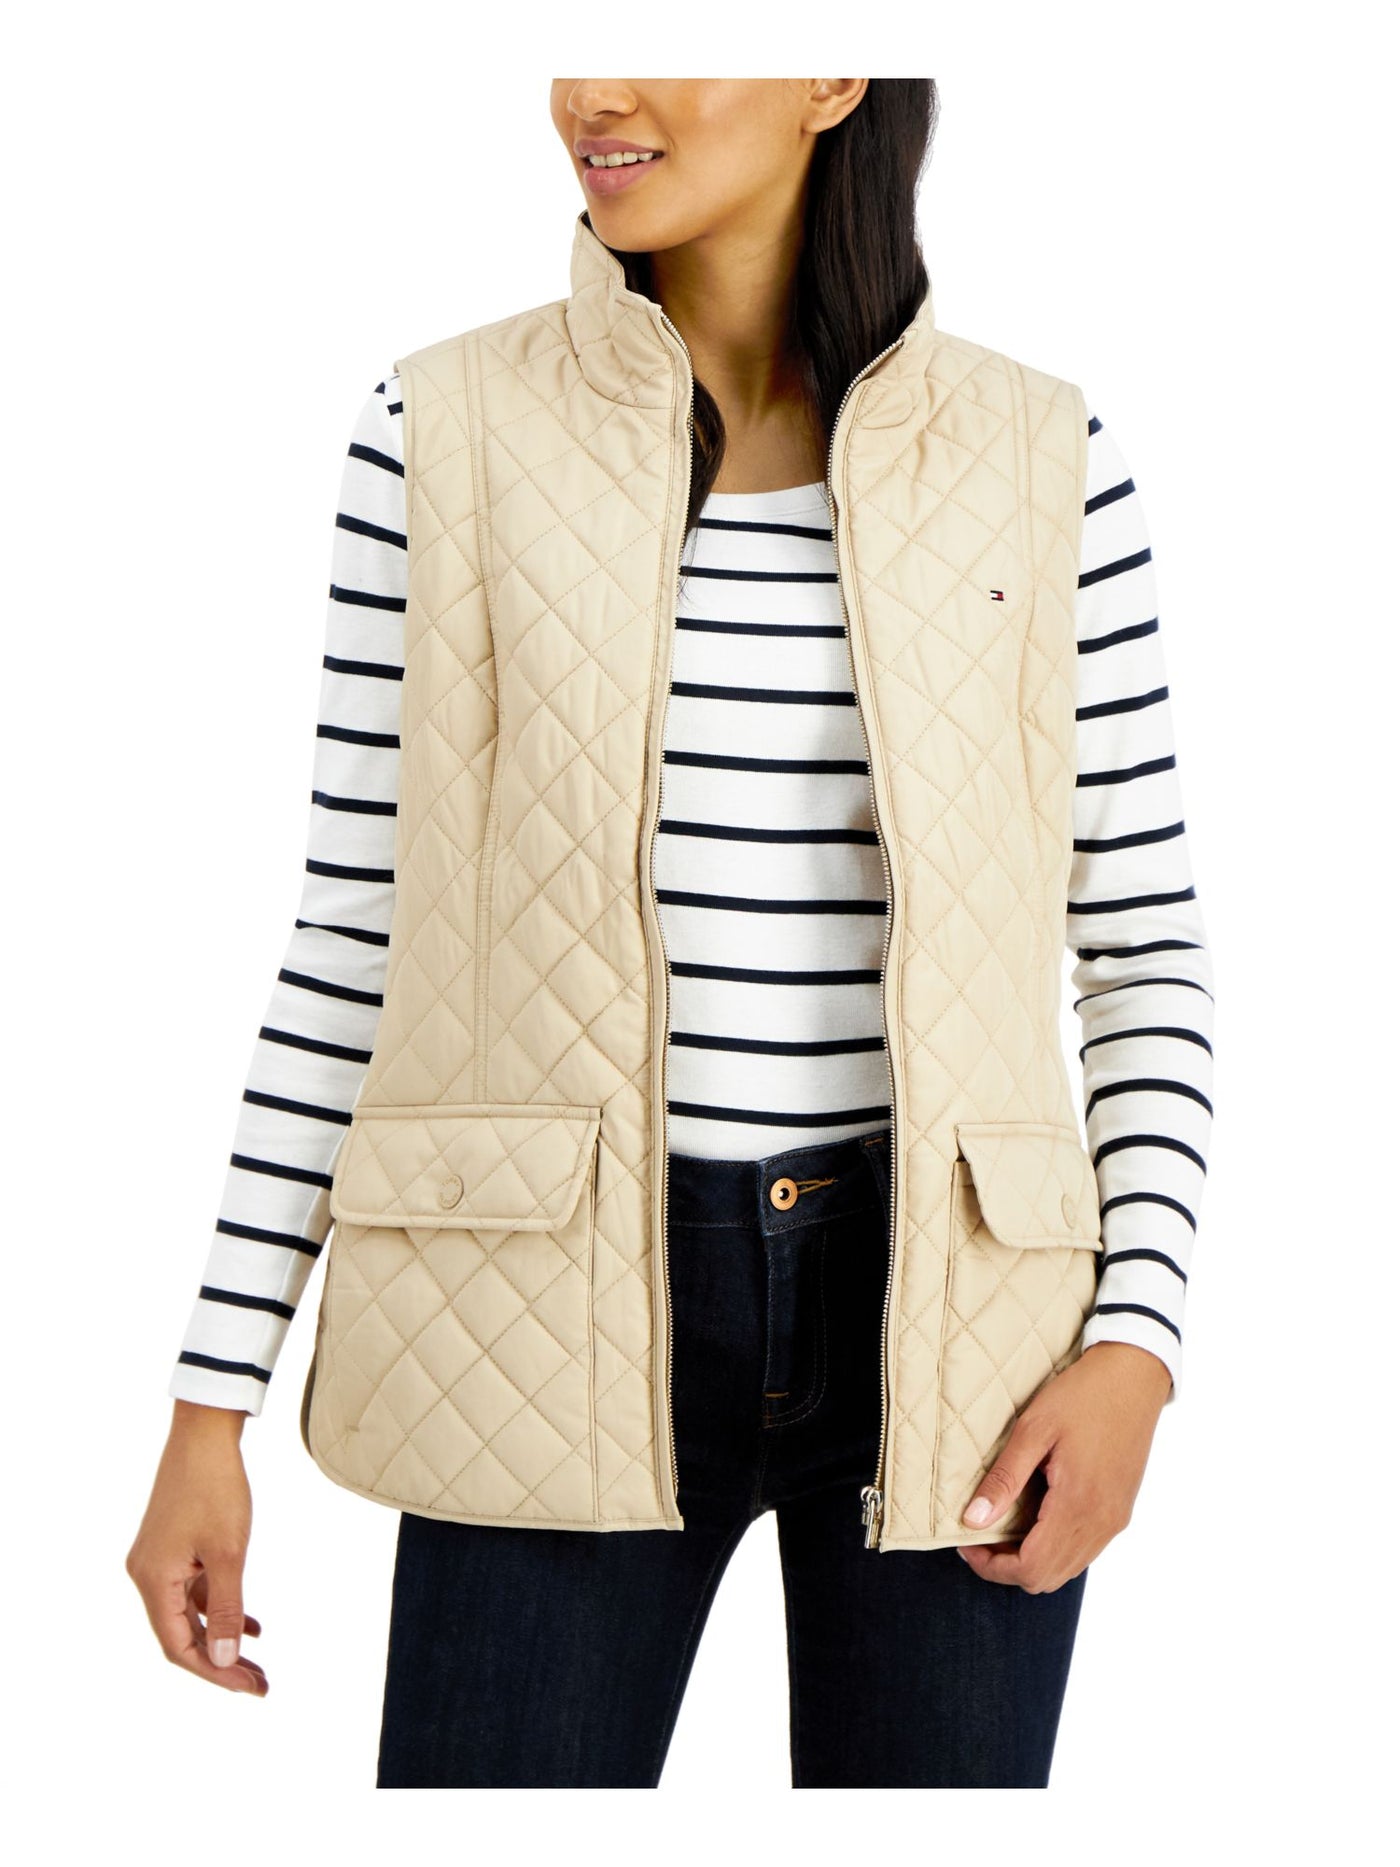 TOMMY HILFIGER Womens Beige Zippered Pocketed Stand Collar Quilted Lined Vest Jacket XS